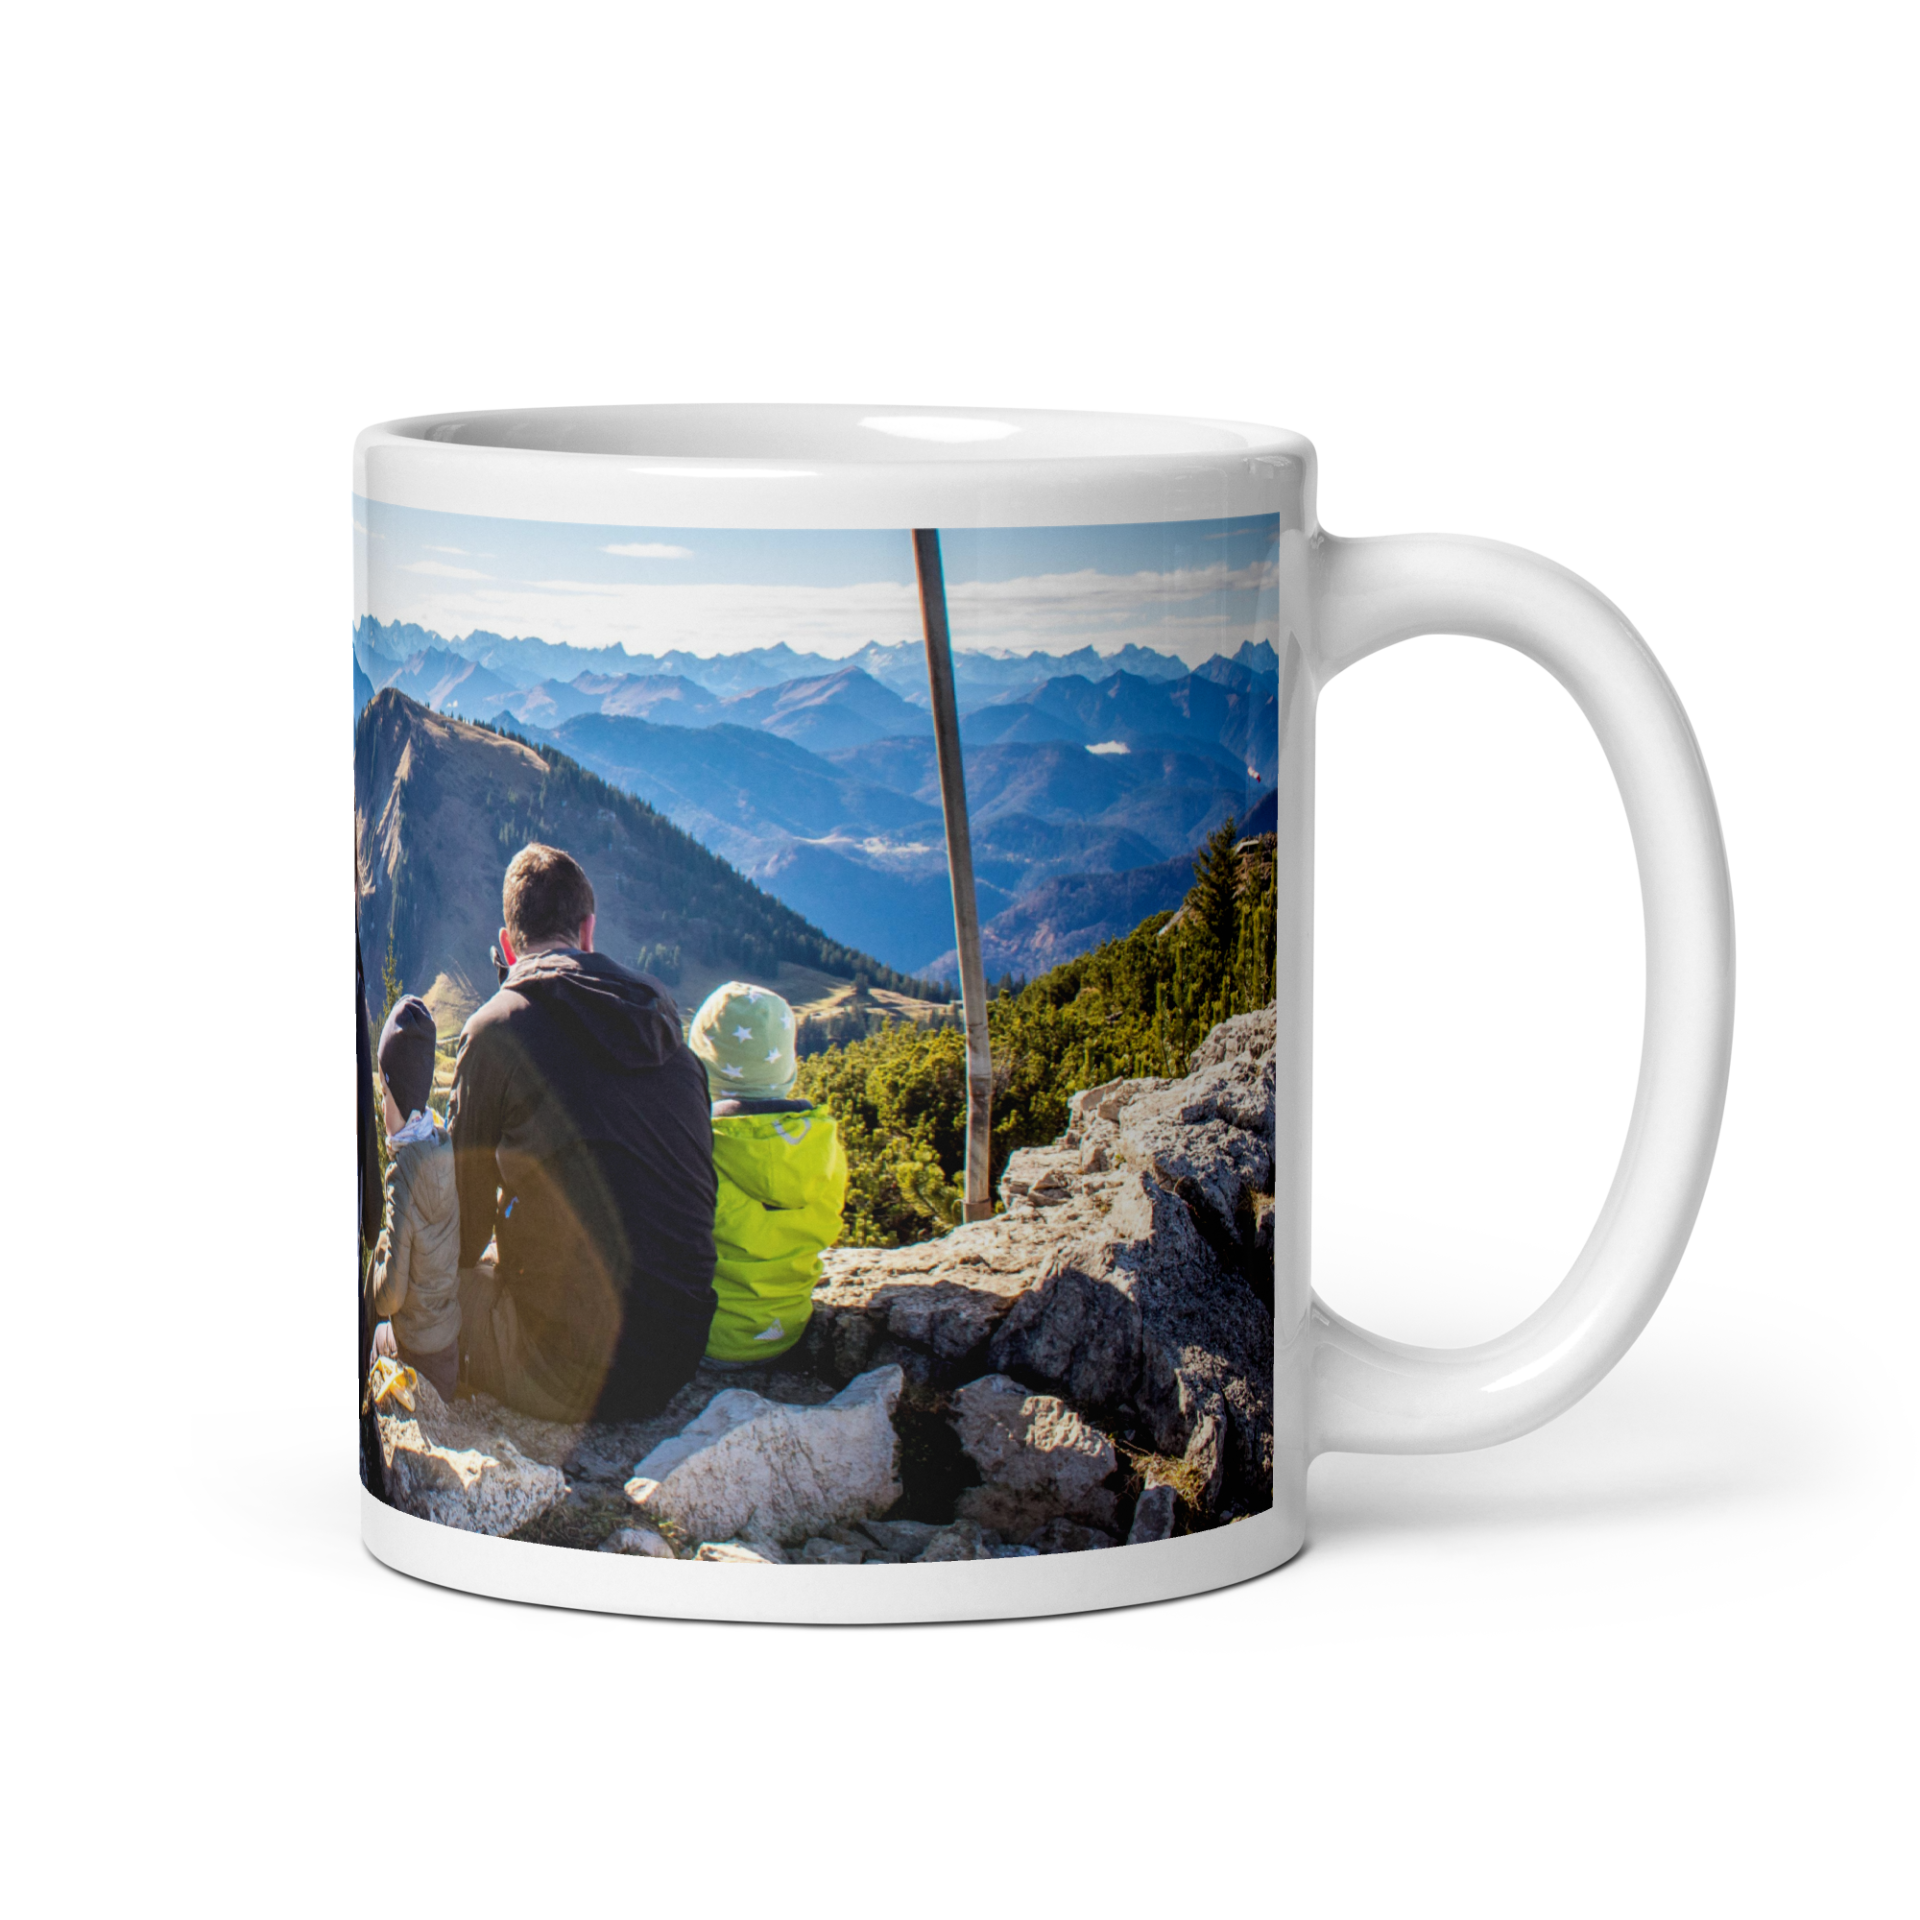 EyeXcite's "Sketch & Toon Mugs" transforms your favorite moments into artful sips! It is a perfect personalized mug for you or your loved ones.